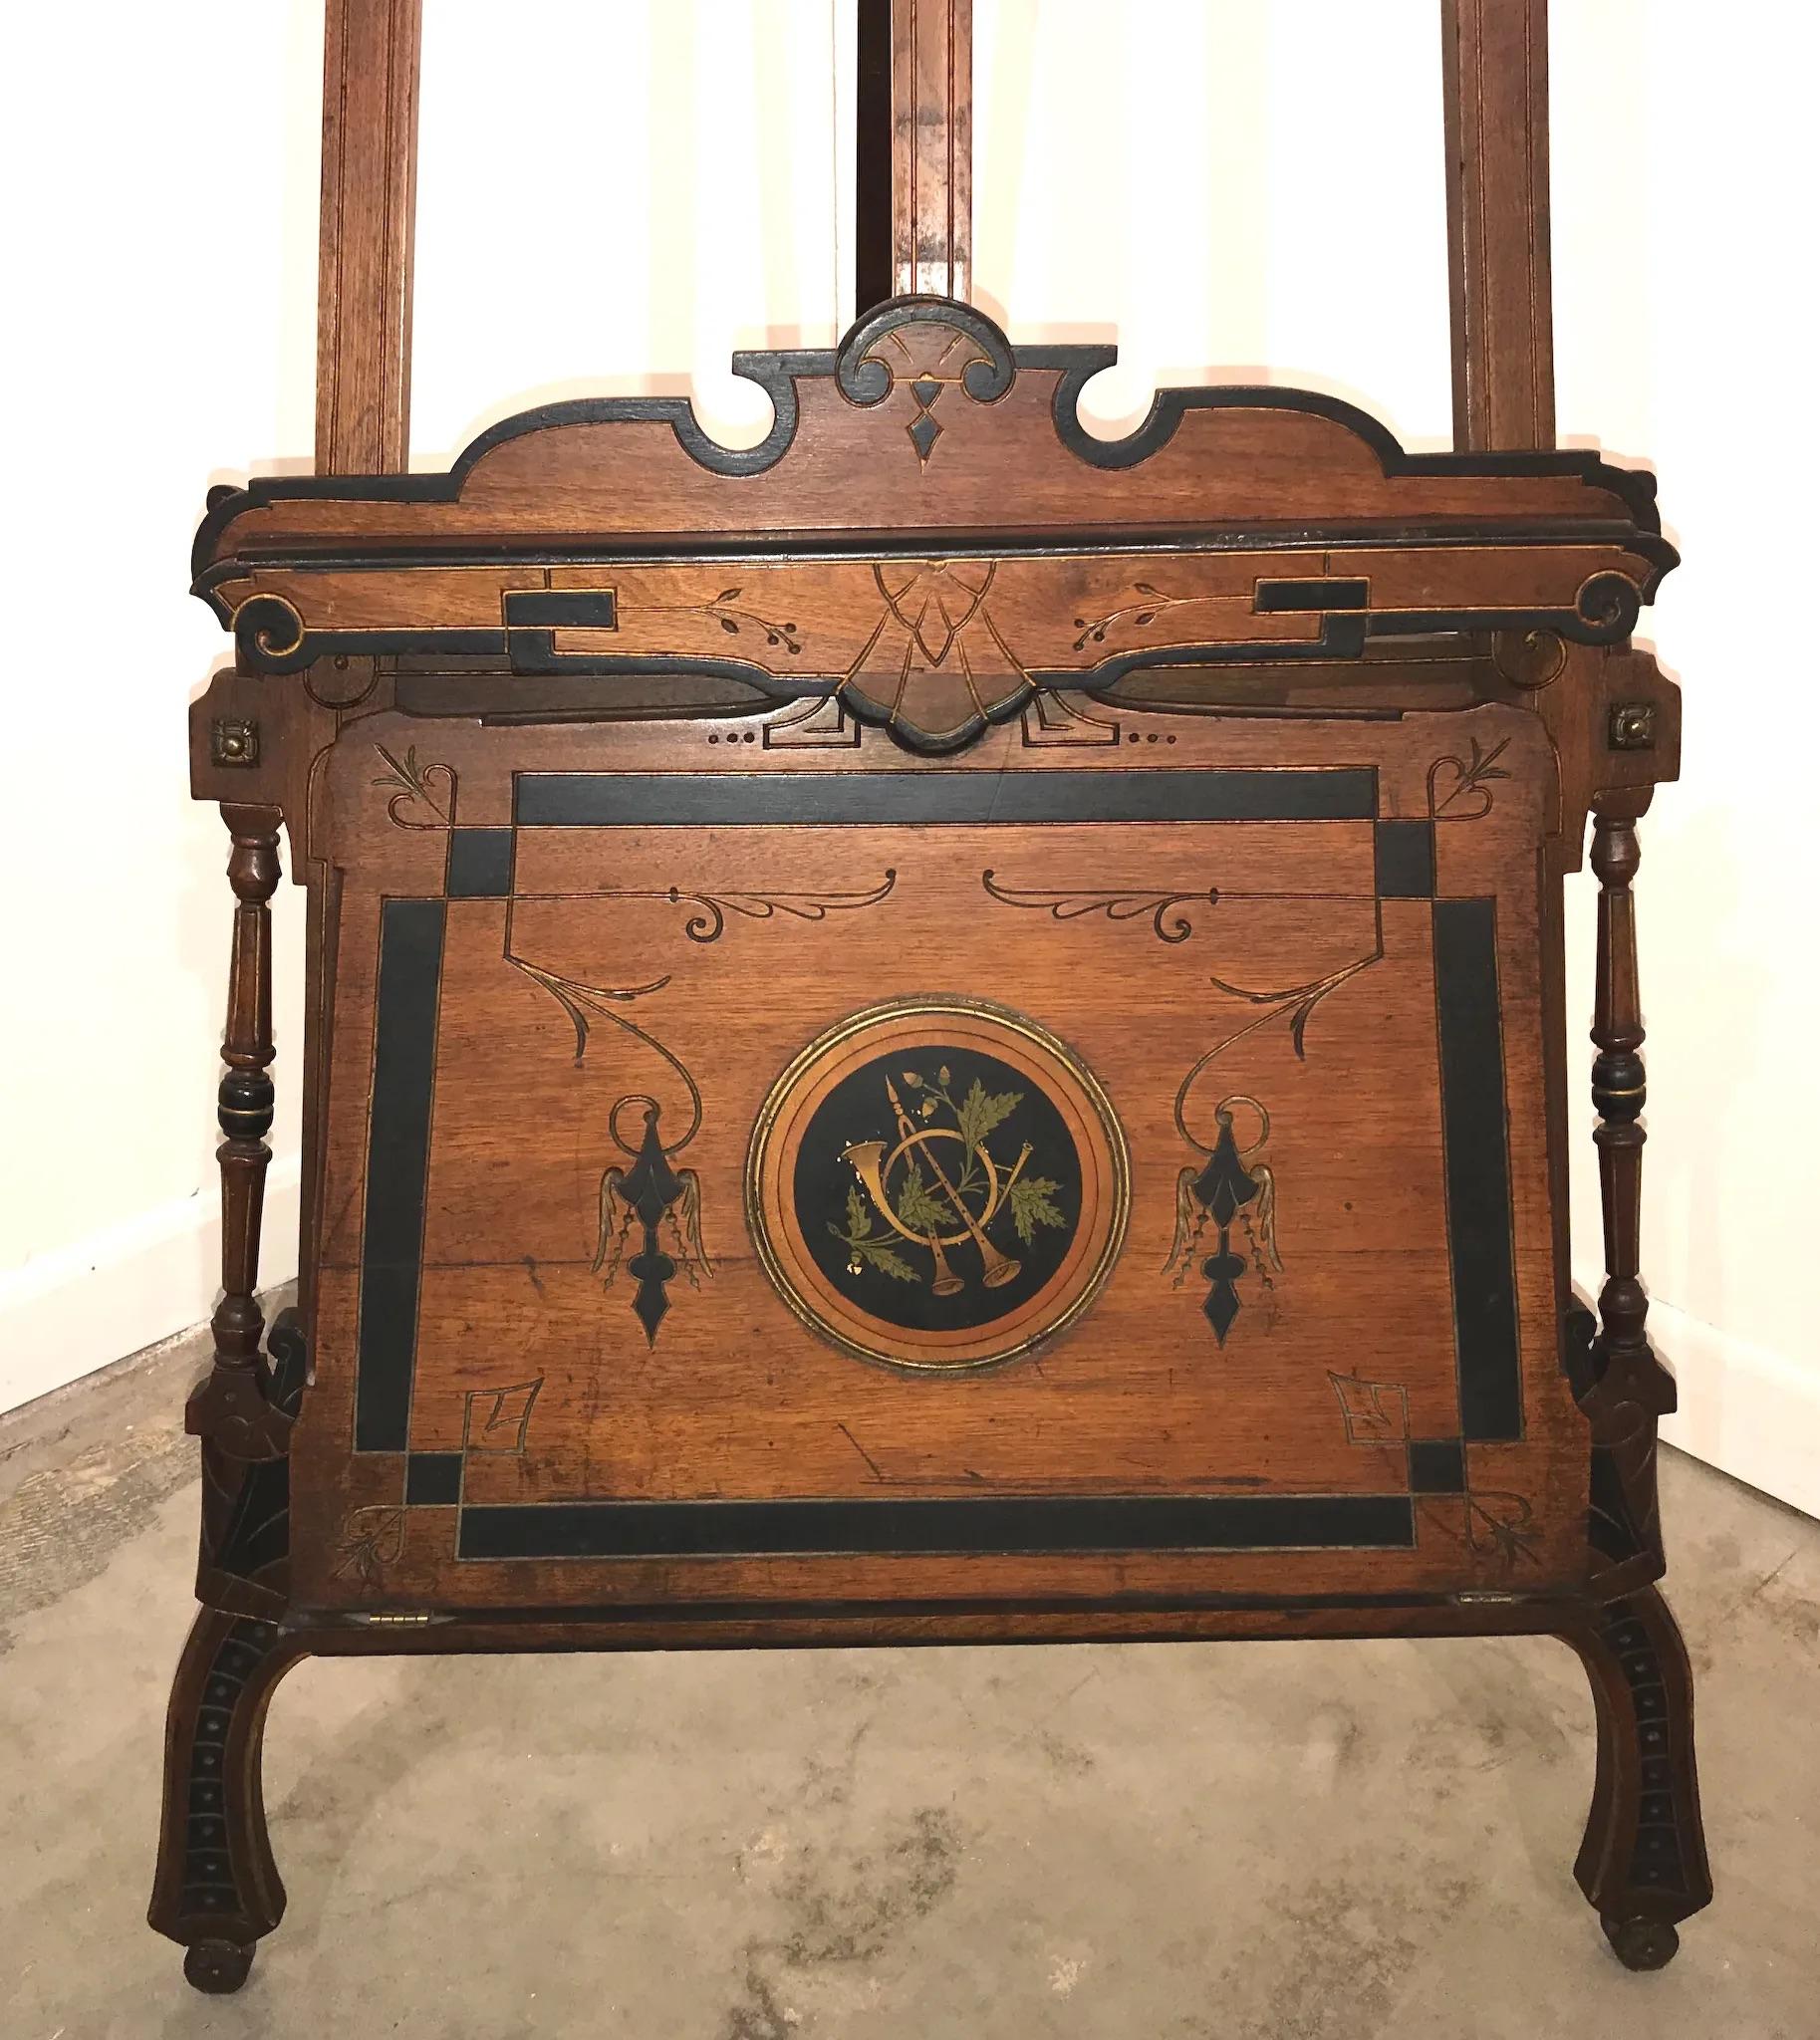 A beautiful example of a Victorian, late 19th century Aesthetic period walnut adjustable painting easel, with nicely carved fold-out portfolio at the base, decorated with satinwood inlaid musical instruments, scrollwork, turned outer support columns